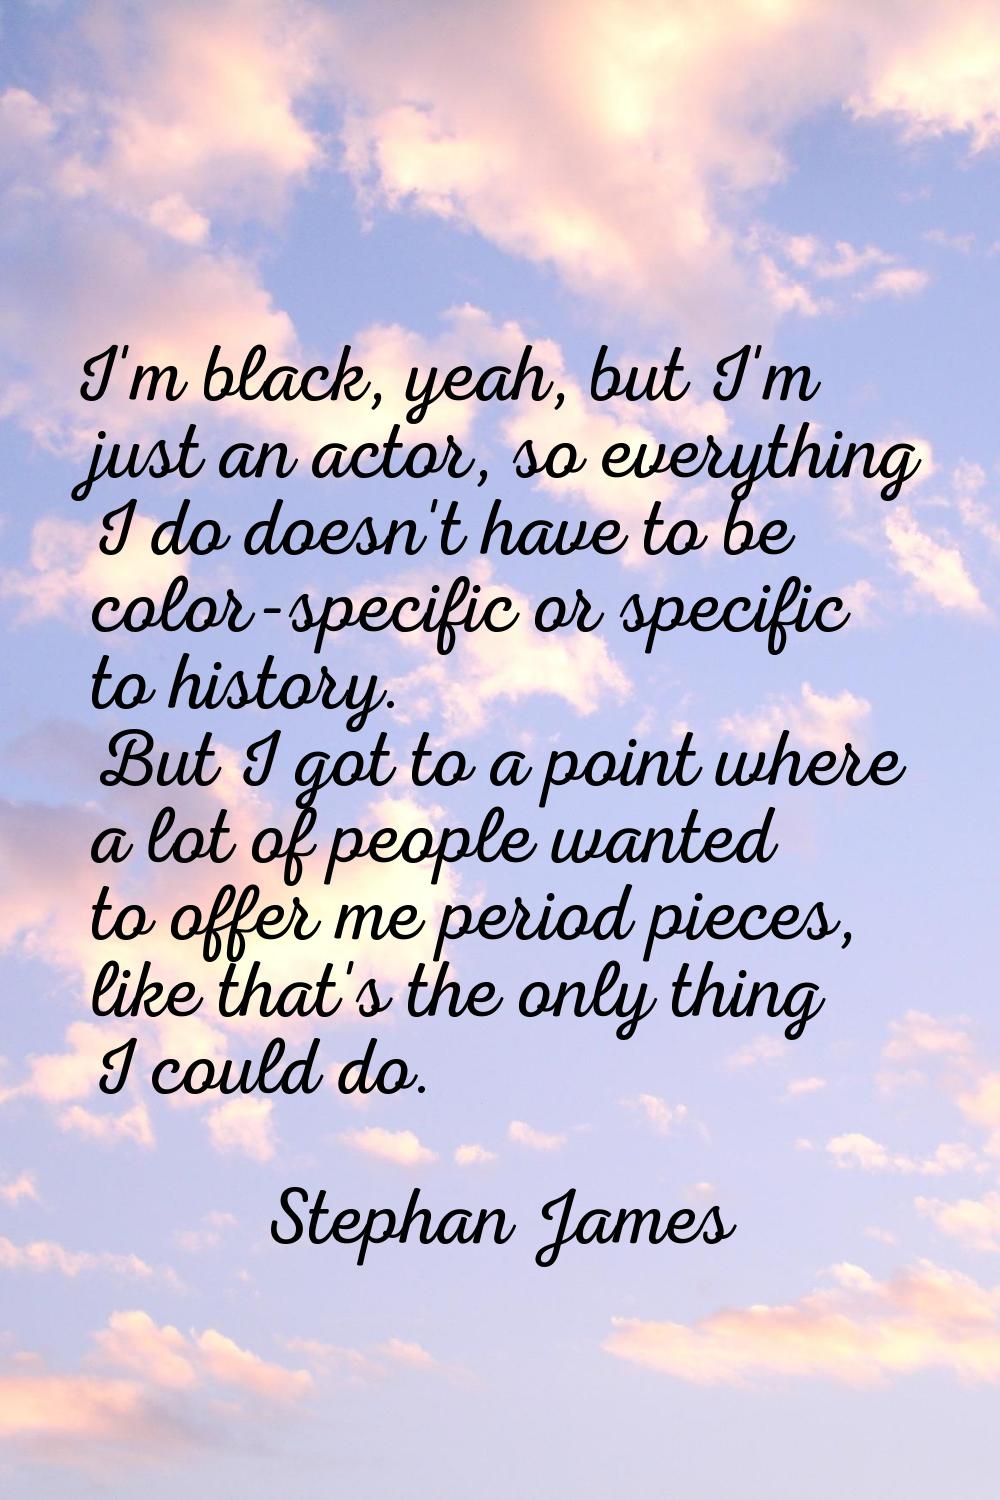 I'm black, yeah, but I'm just an actor, so everything I do doesn't have to be color-specific or spe